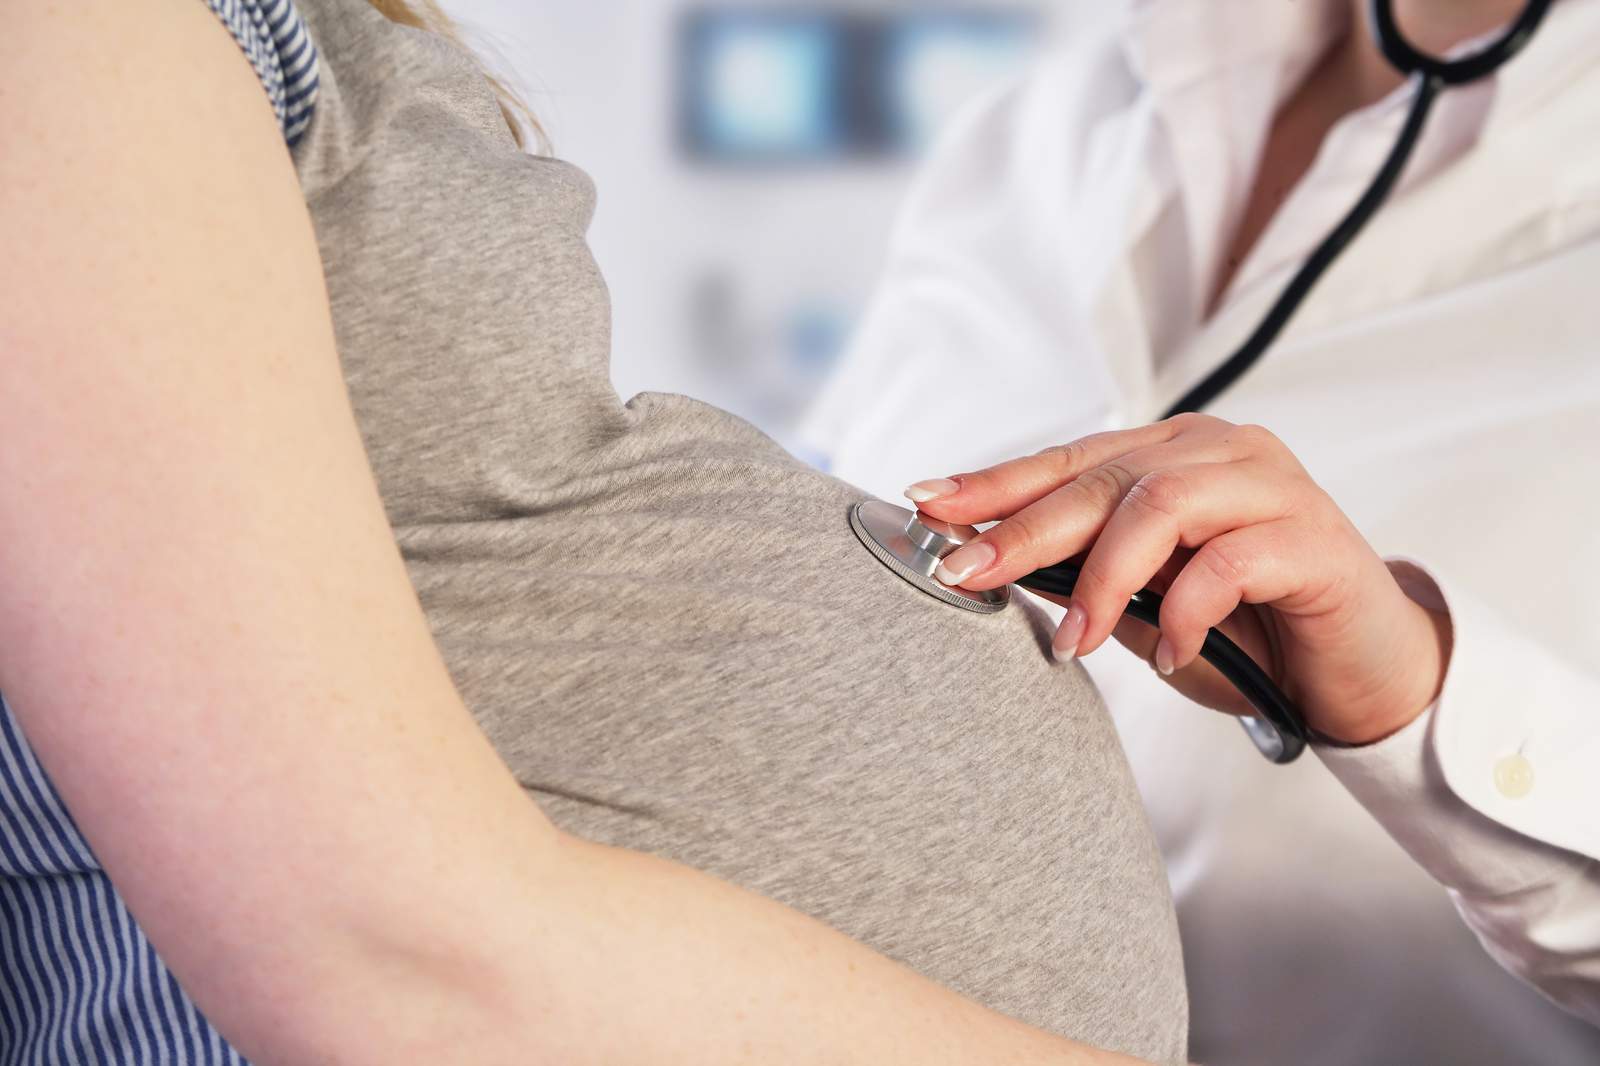 Many pregnant women are testing positive for COVID-19 in San Antonio, health officials say